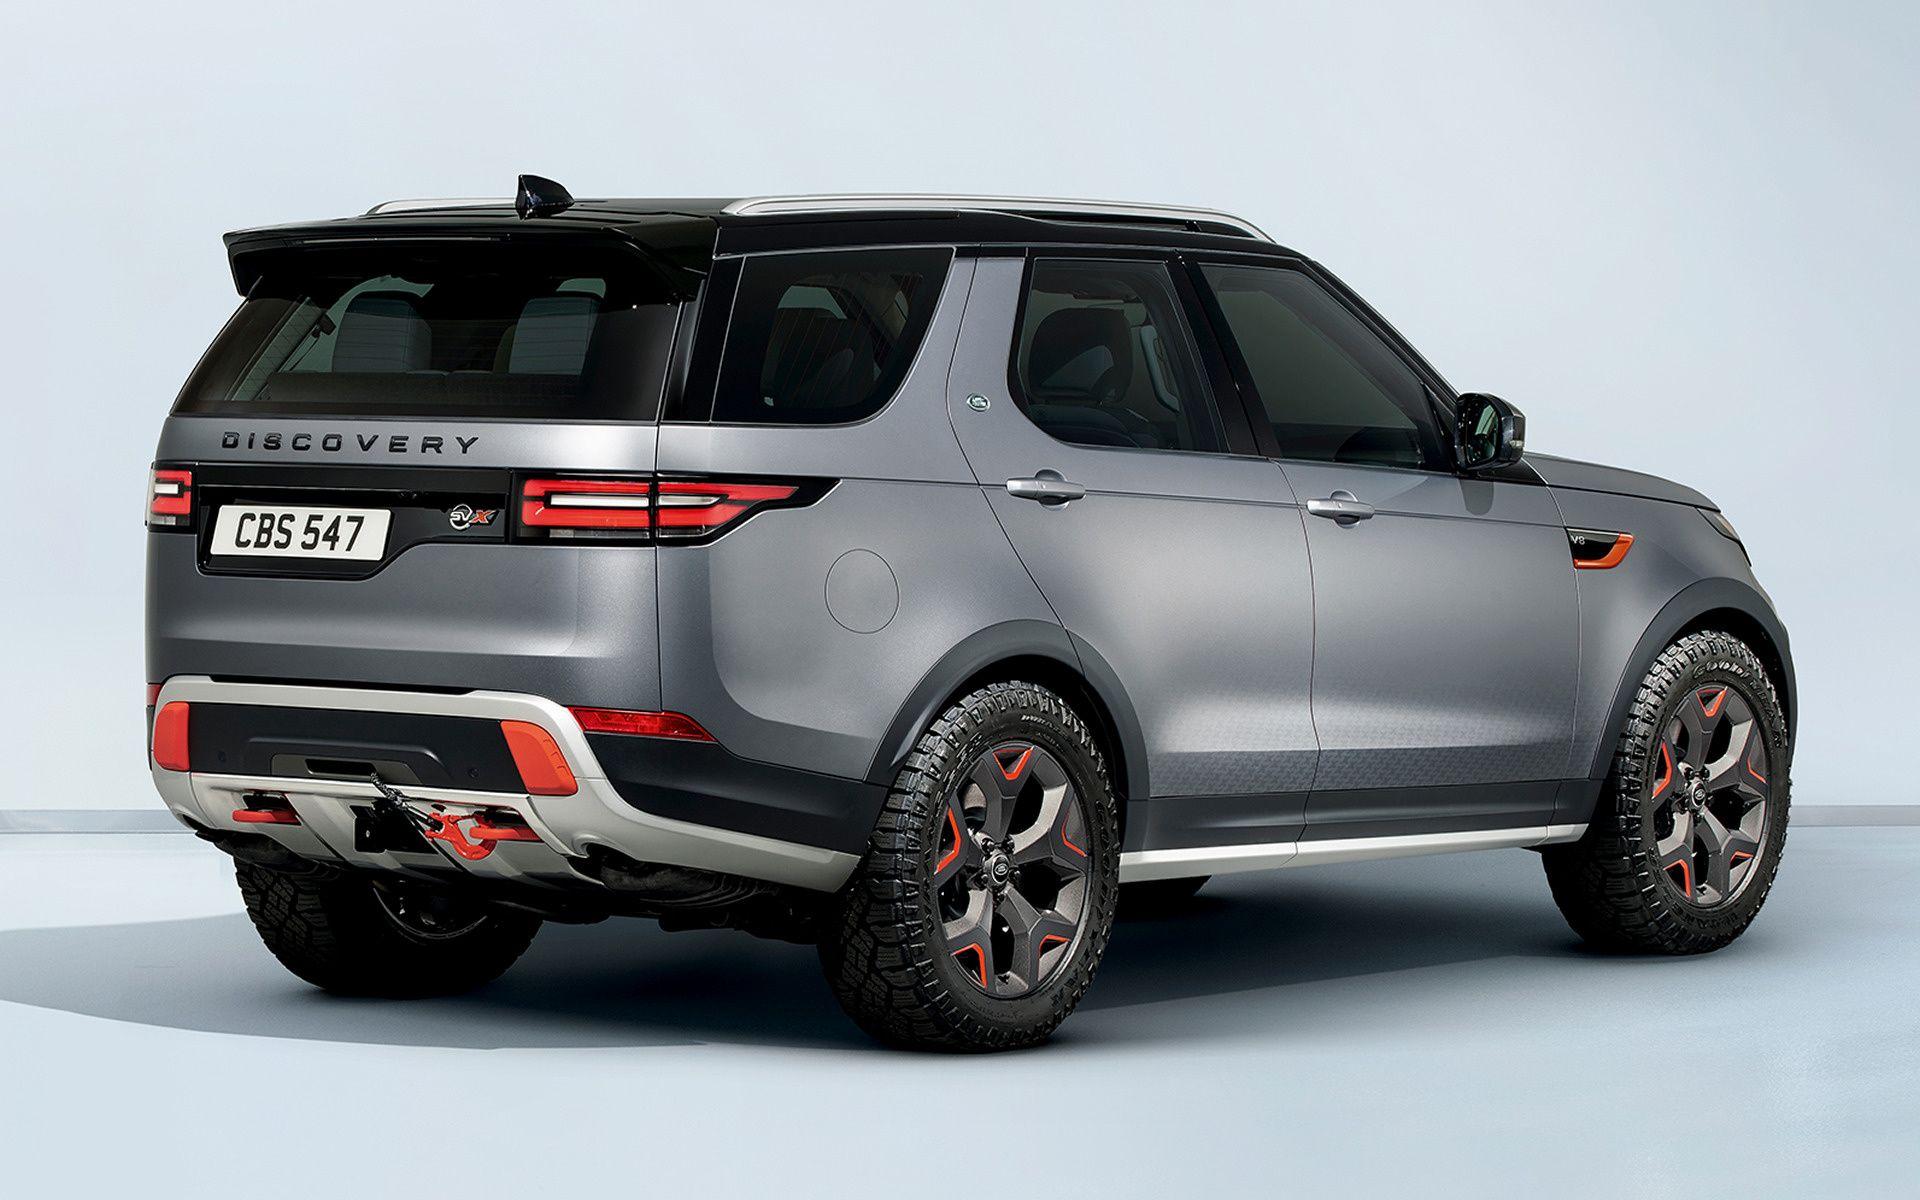 Land Rover Discovery SVX (2018) US Wallpaper and HD Image